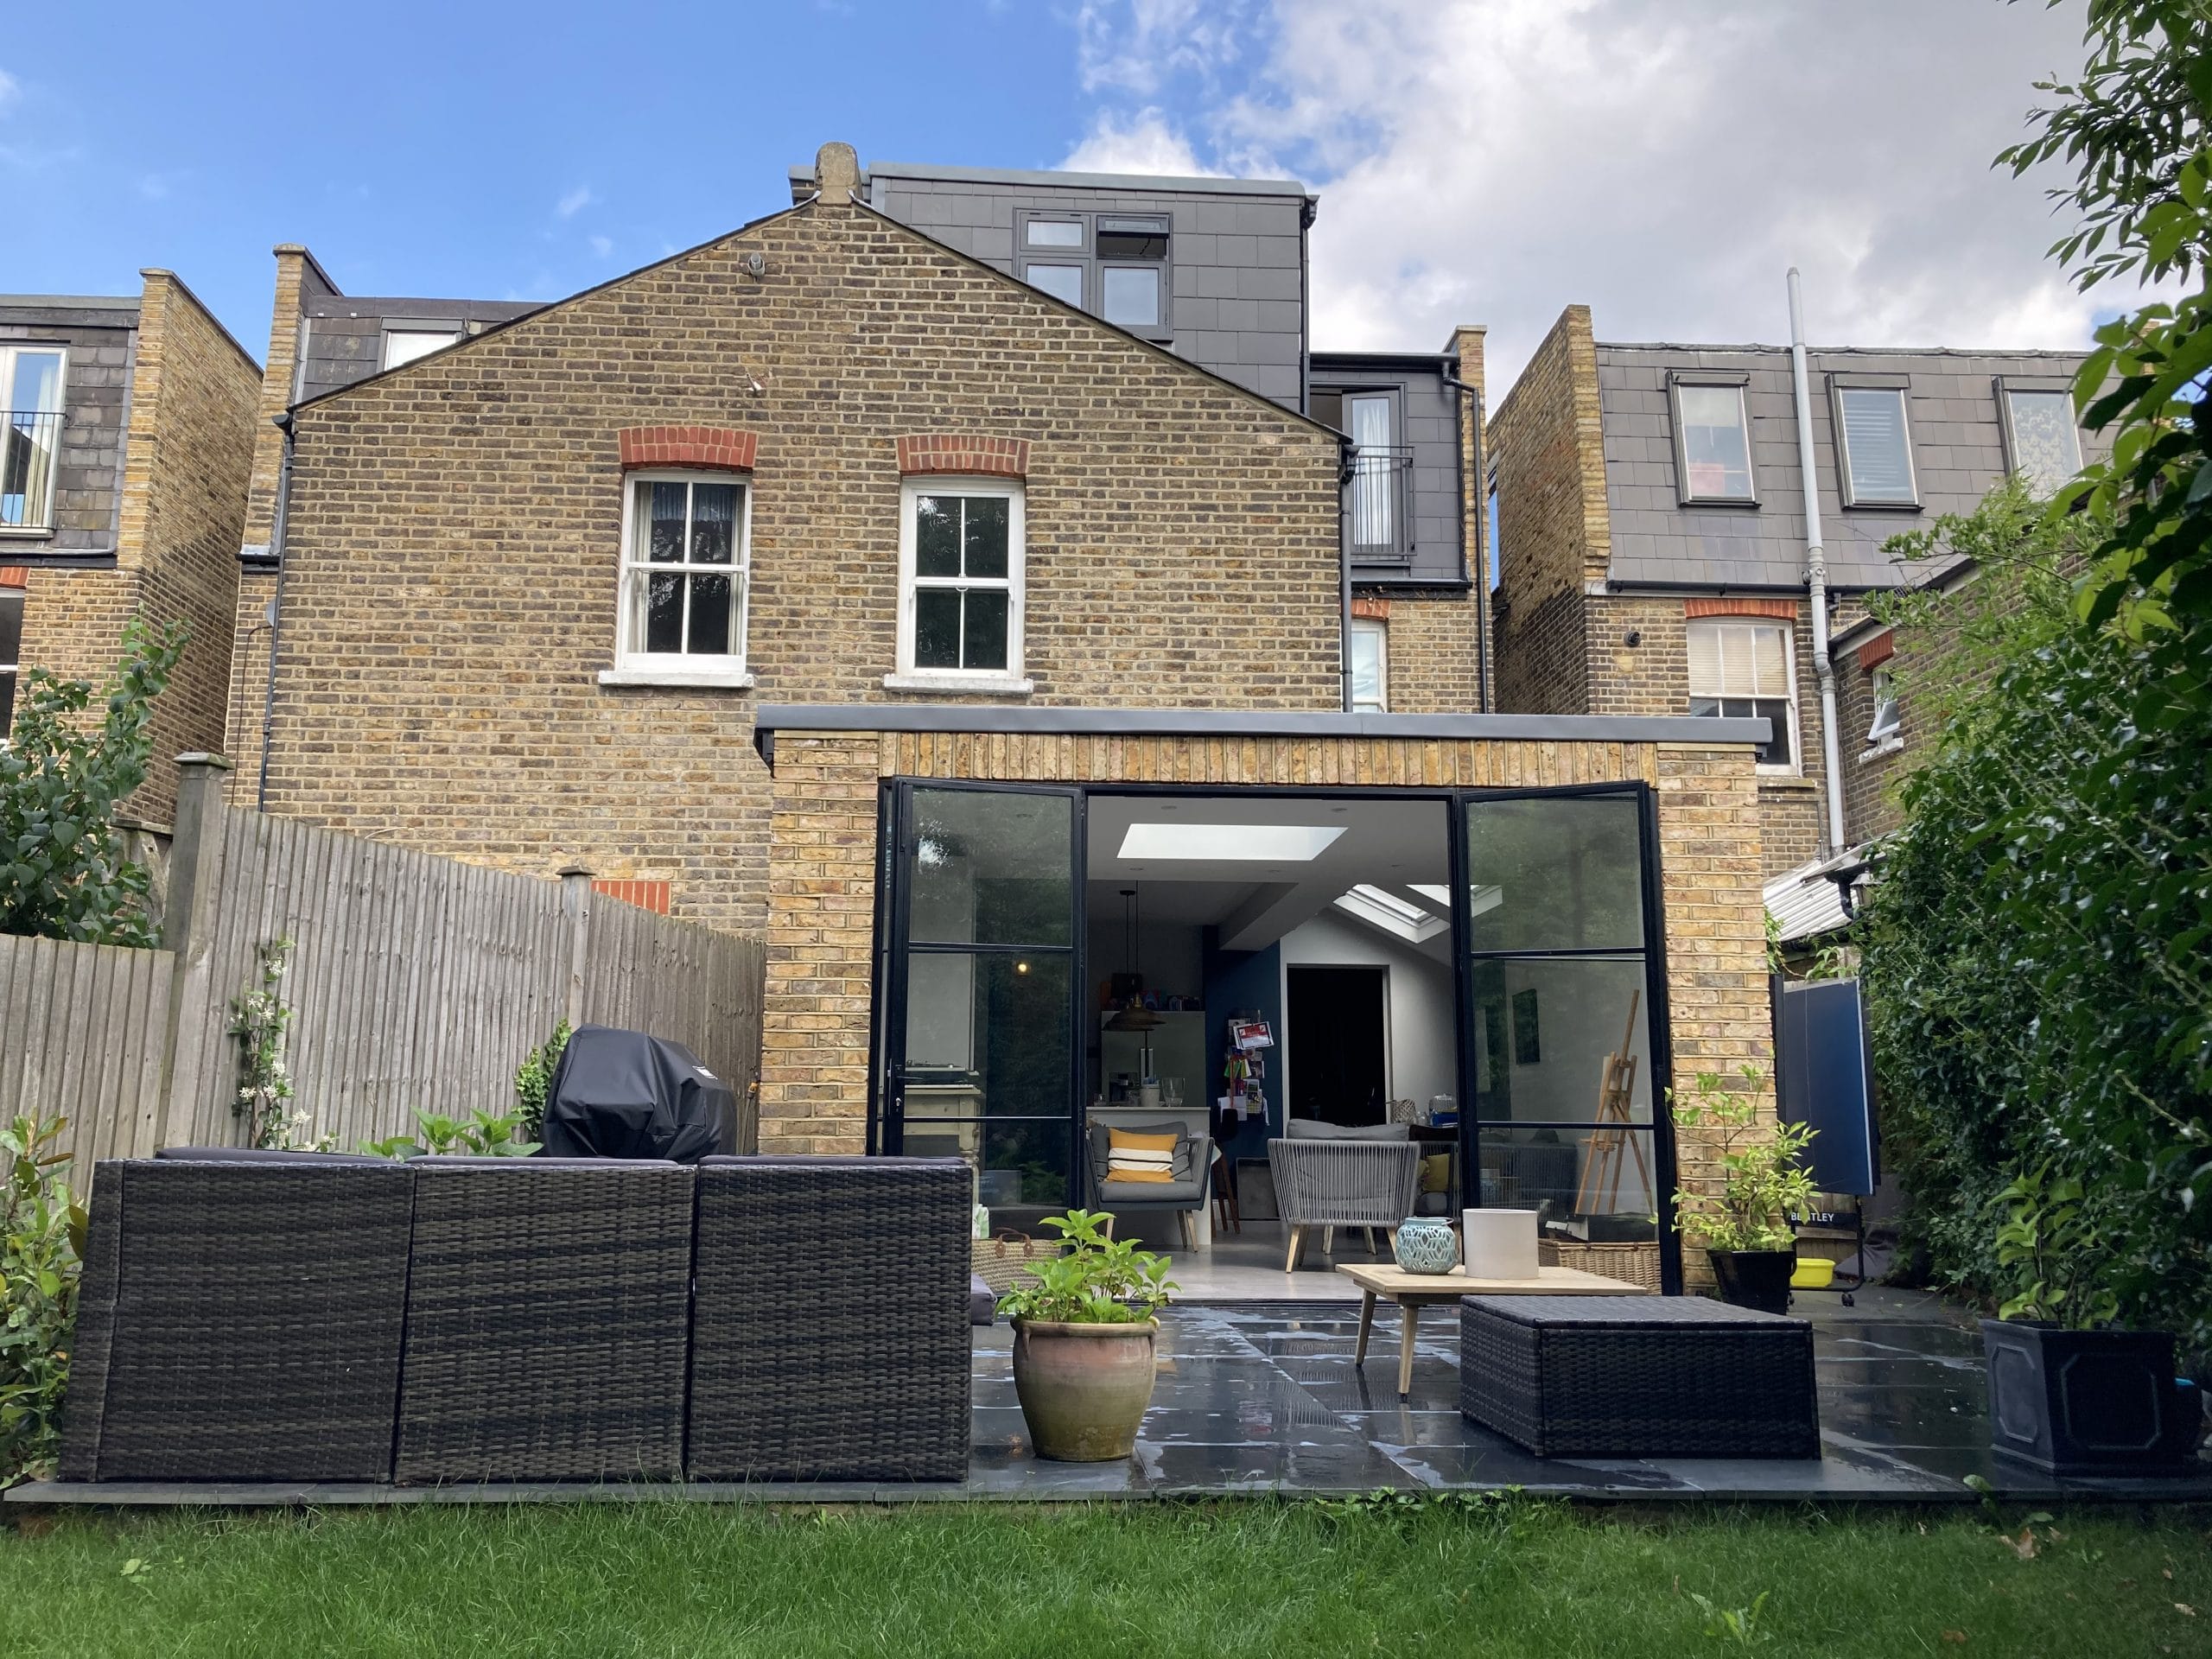 A lovely four bedroom Victorian home, situated close to Twickenham studios and St Margaret’s high street. Large garden, extended kitchen, fully remodelled and available for stills and television shoots